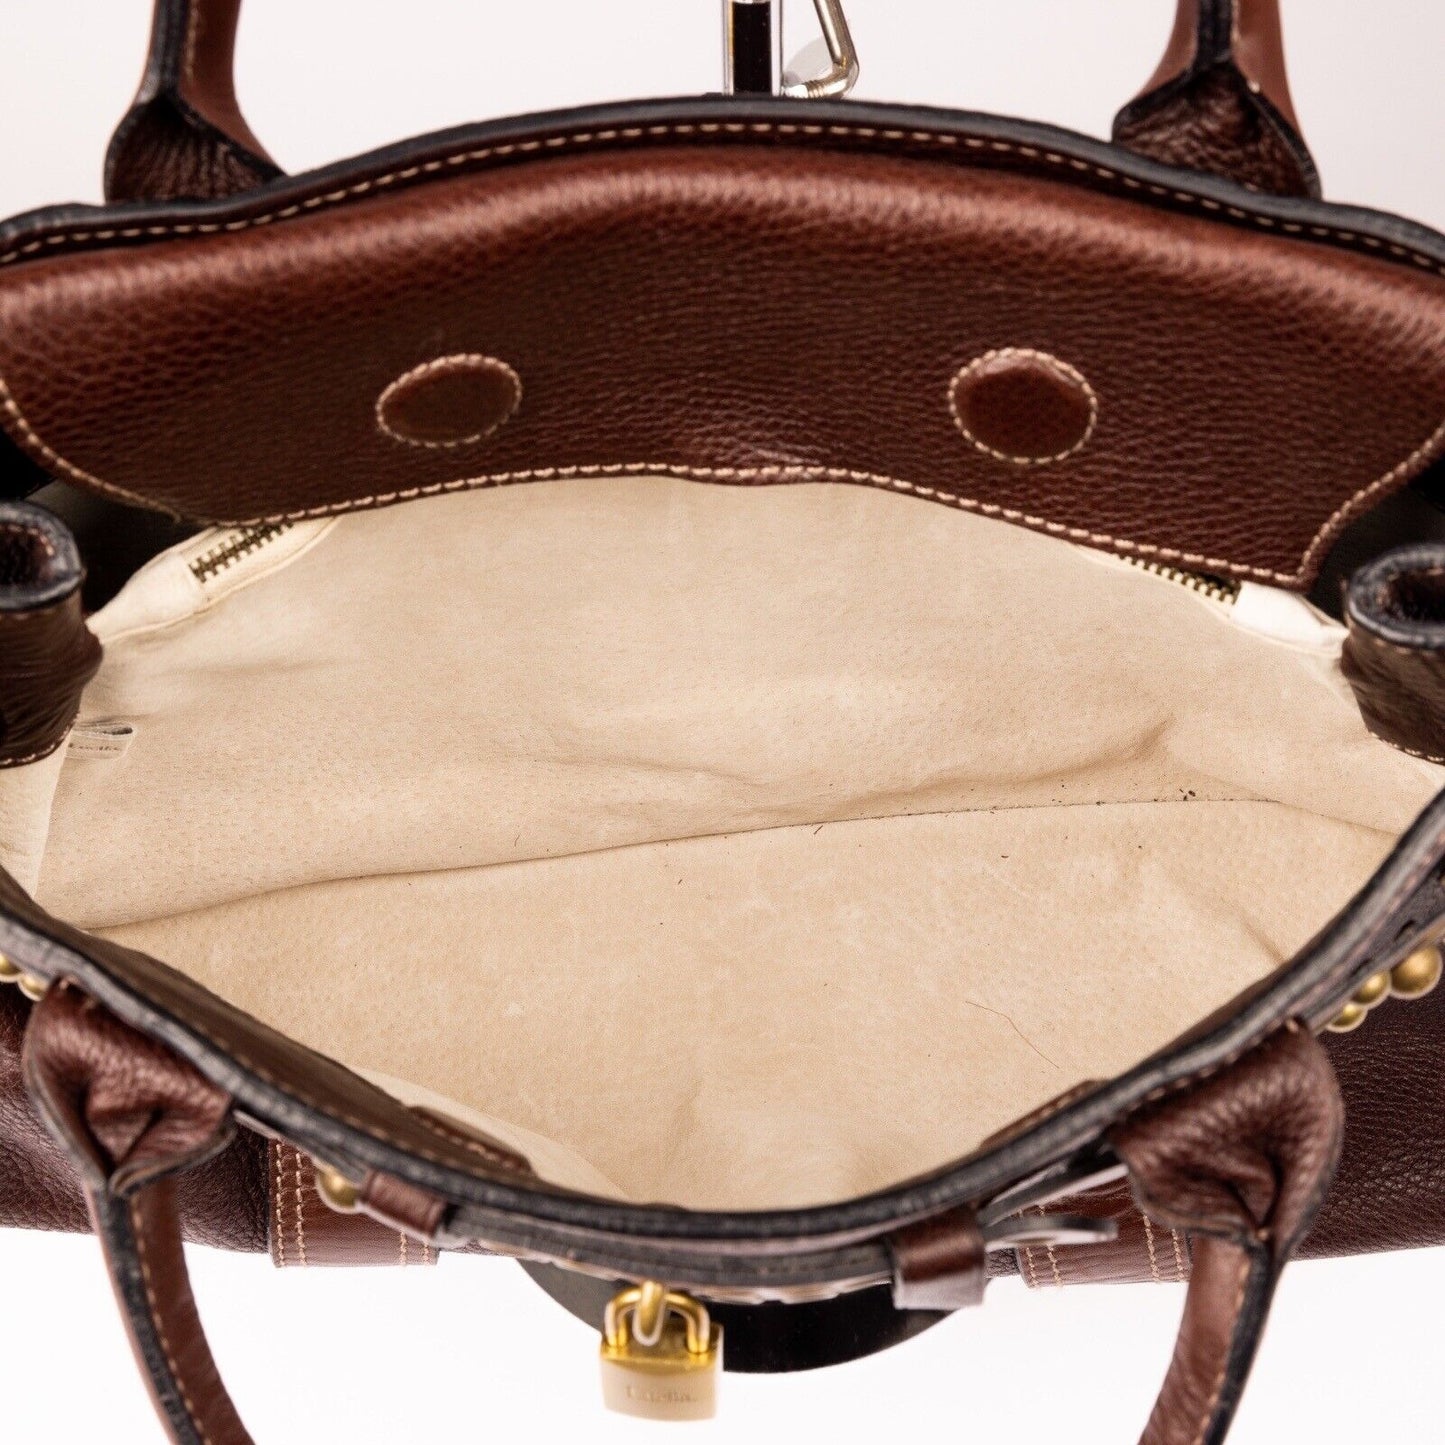 Inside View Of Texturized Tote Style Handbag